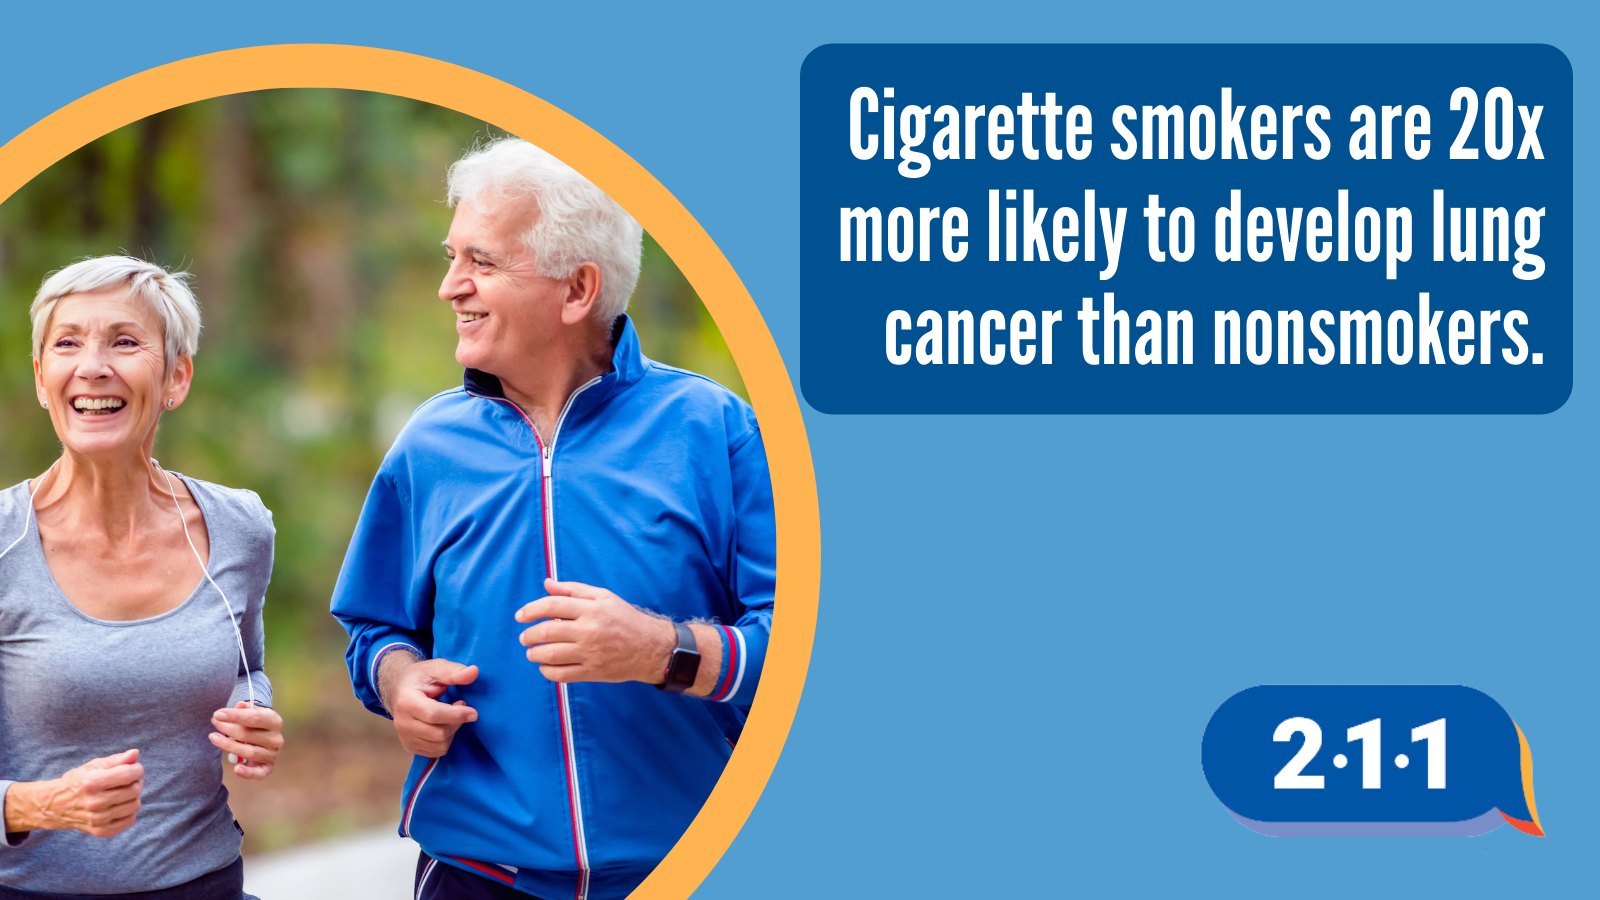 Jogging Seniors and text: Cigarette smokers are 20x more likely to develop lung cancer than nonsmokers. 2-1-1